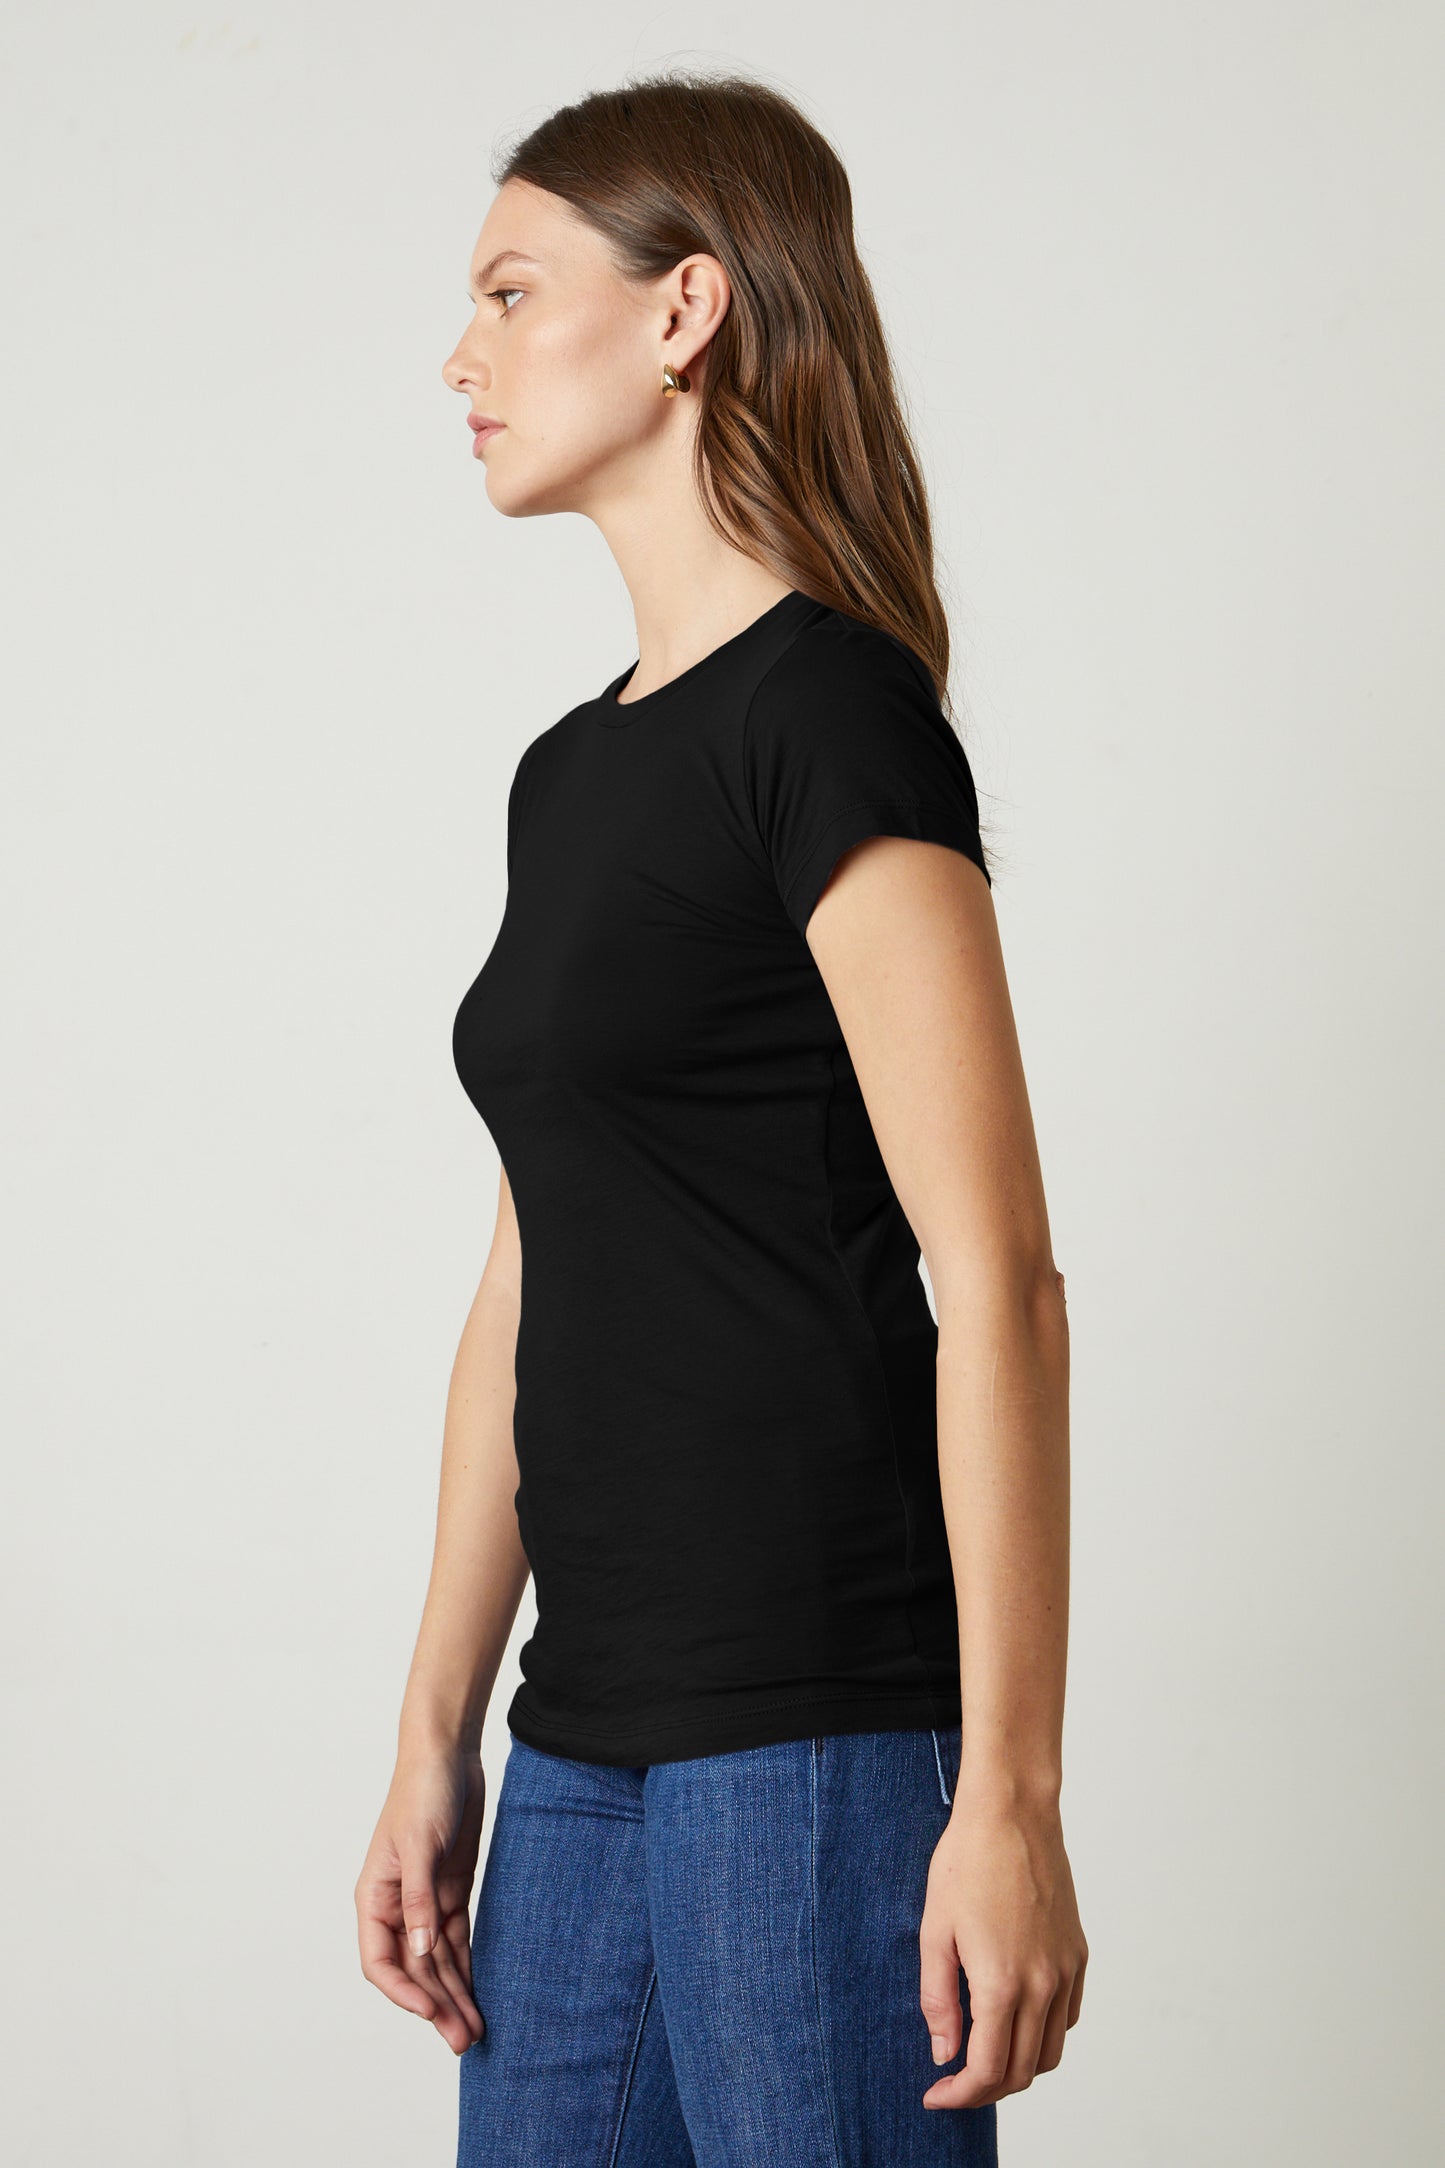 A woman donning a JEMMA GAUZY WHISPER FITTED CREW NECK TEE by Velvet by Graham & Spencer and jeans.-35416738234561